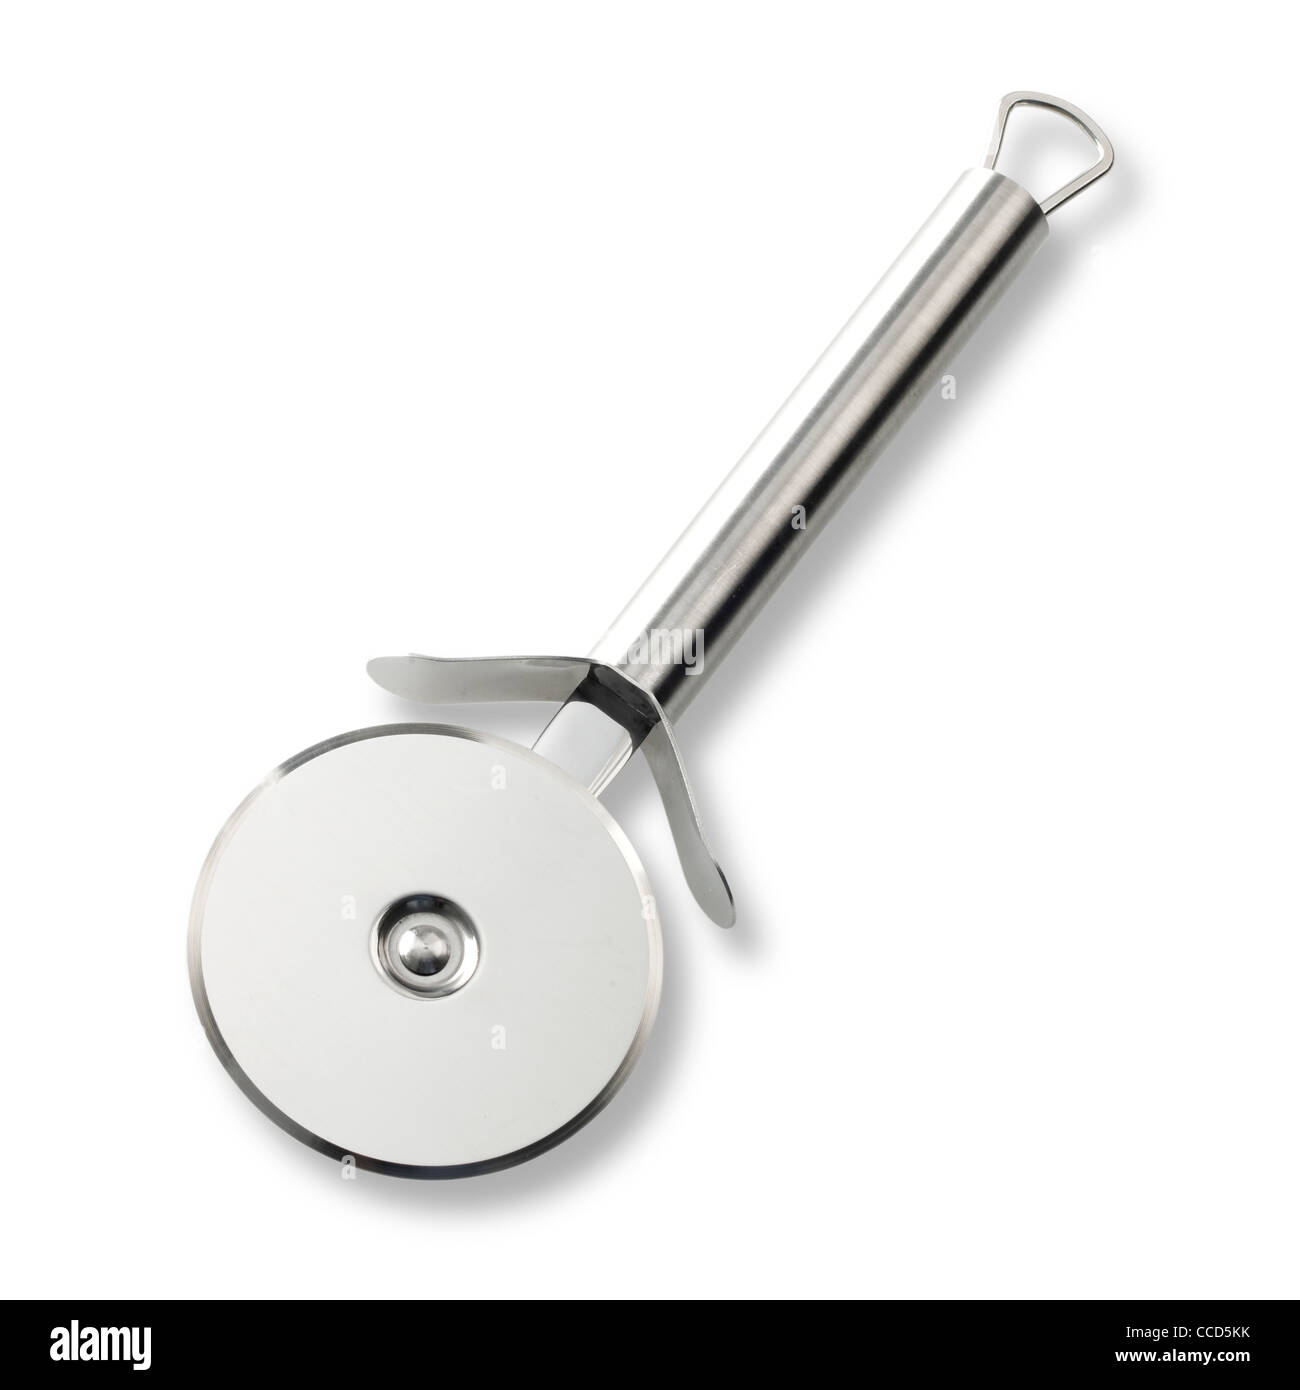 A still life shot of a stainless steel kitchen implement or pizza cutter on a white background with shadow Stock Photo